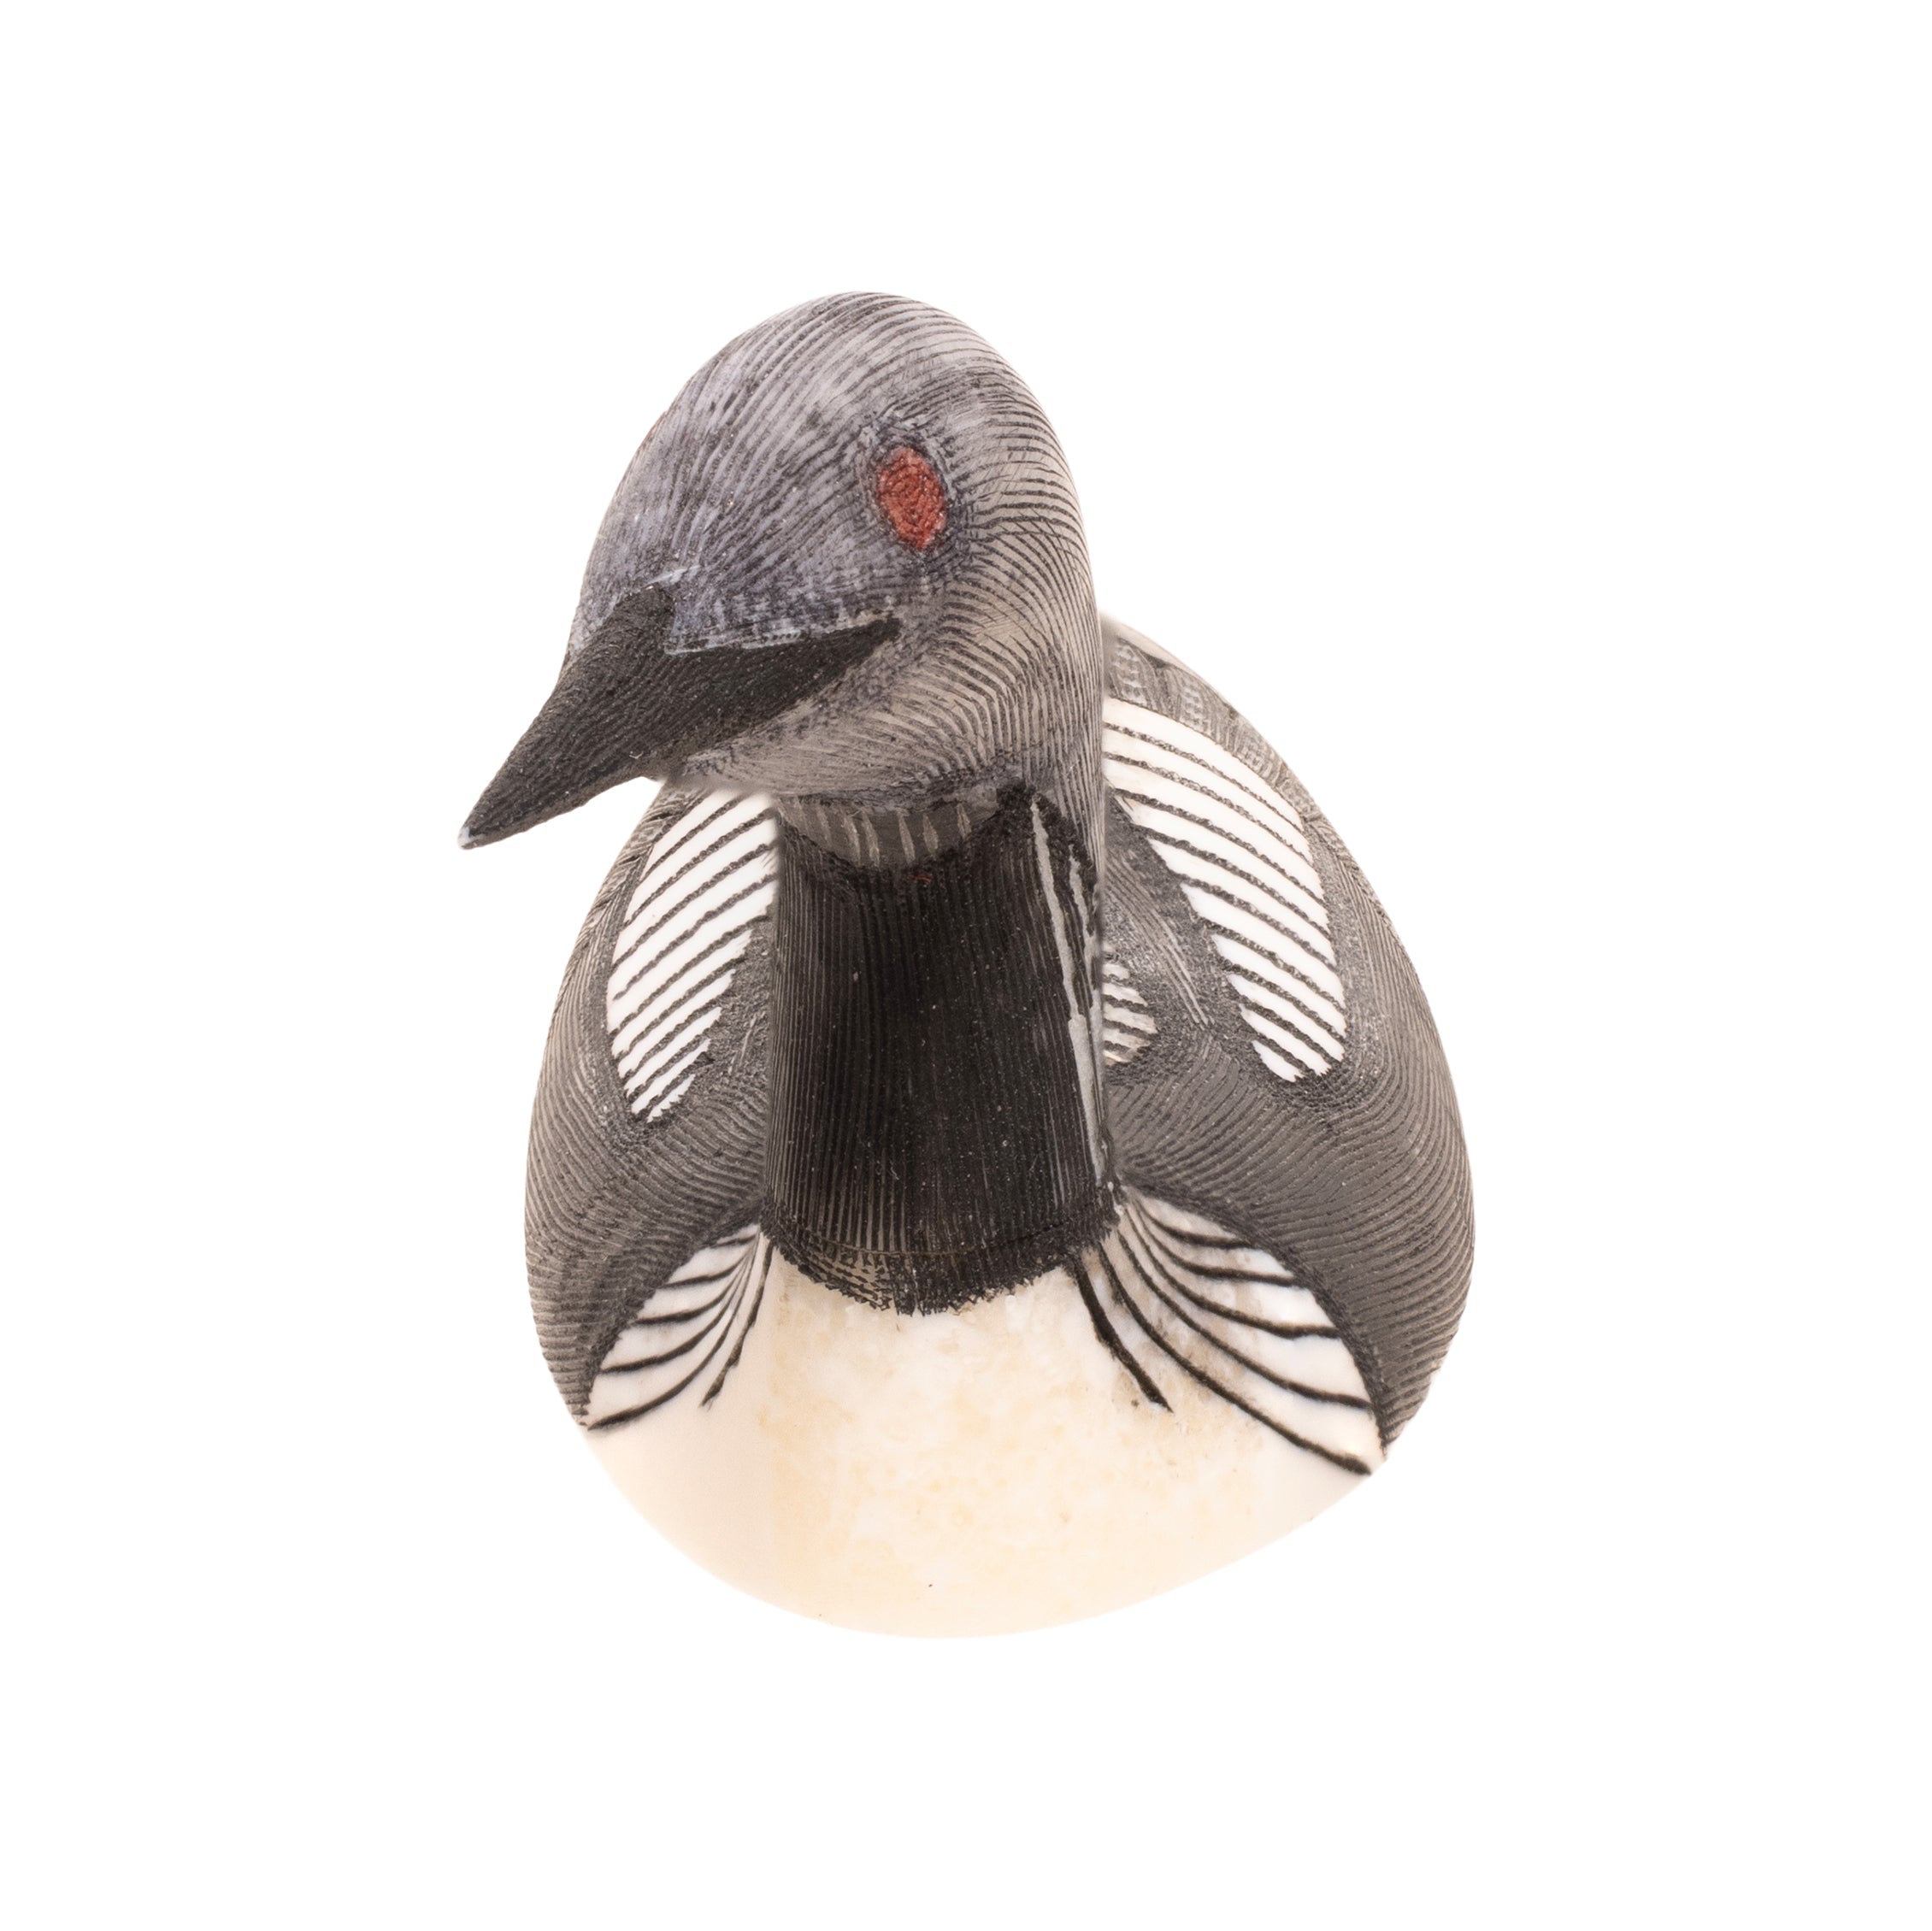 Inuit Loon Carving by Larry Mayac